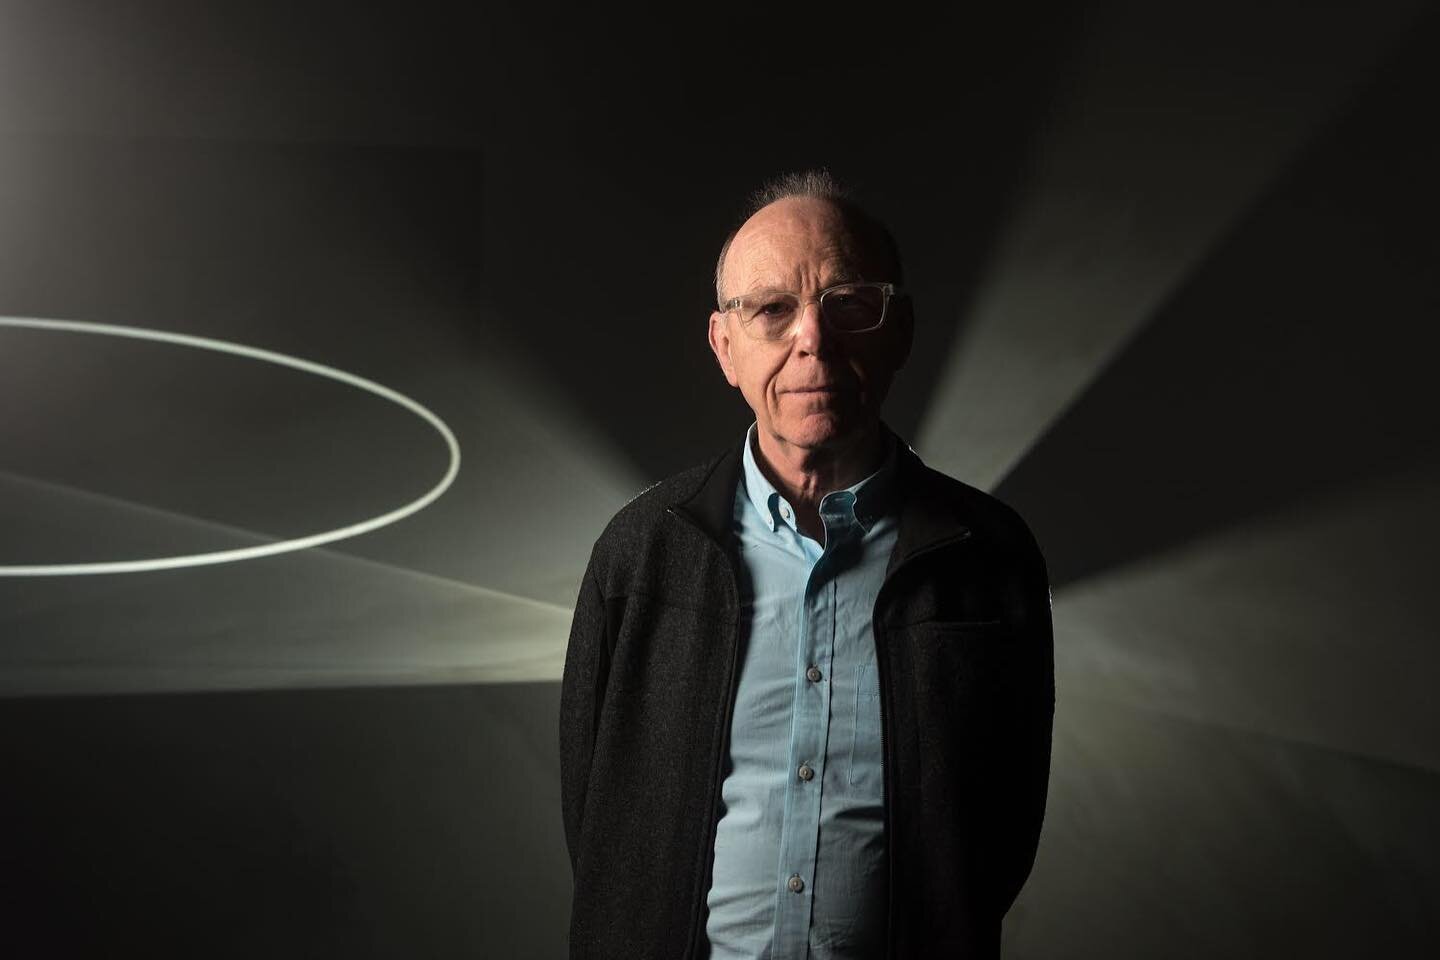 Anthony McCall Studio is pleased to announce this Friday (October 23rd) from 5-6PM, McCall will be in conversation with Courtney J. Martin, director of @yalebritishart .
To register for the webinar, click the link in bio! 

PC: Darren O&rsquo;Brien/G